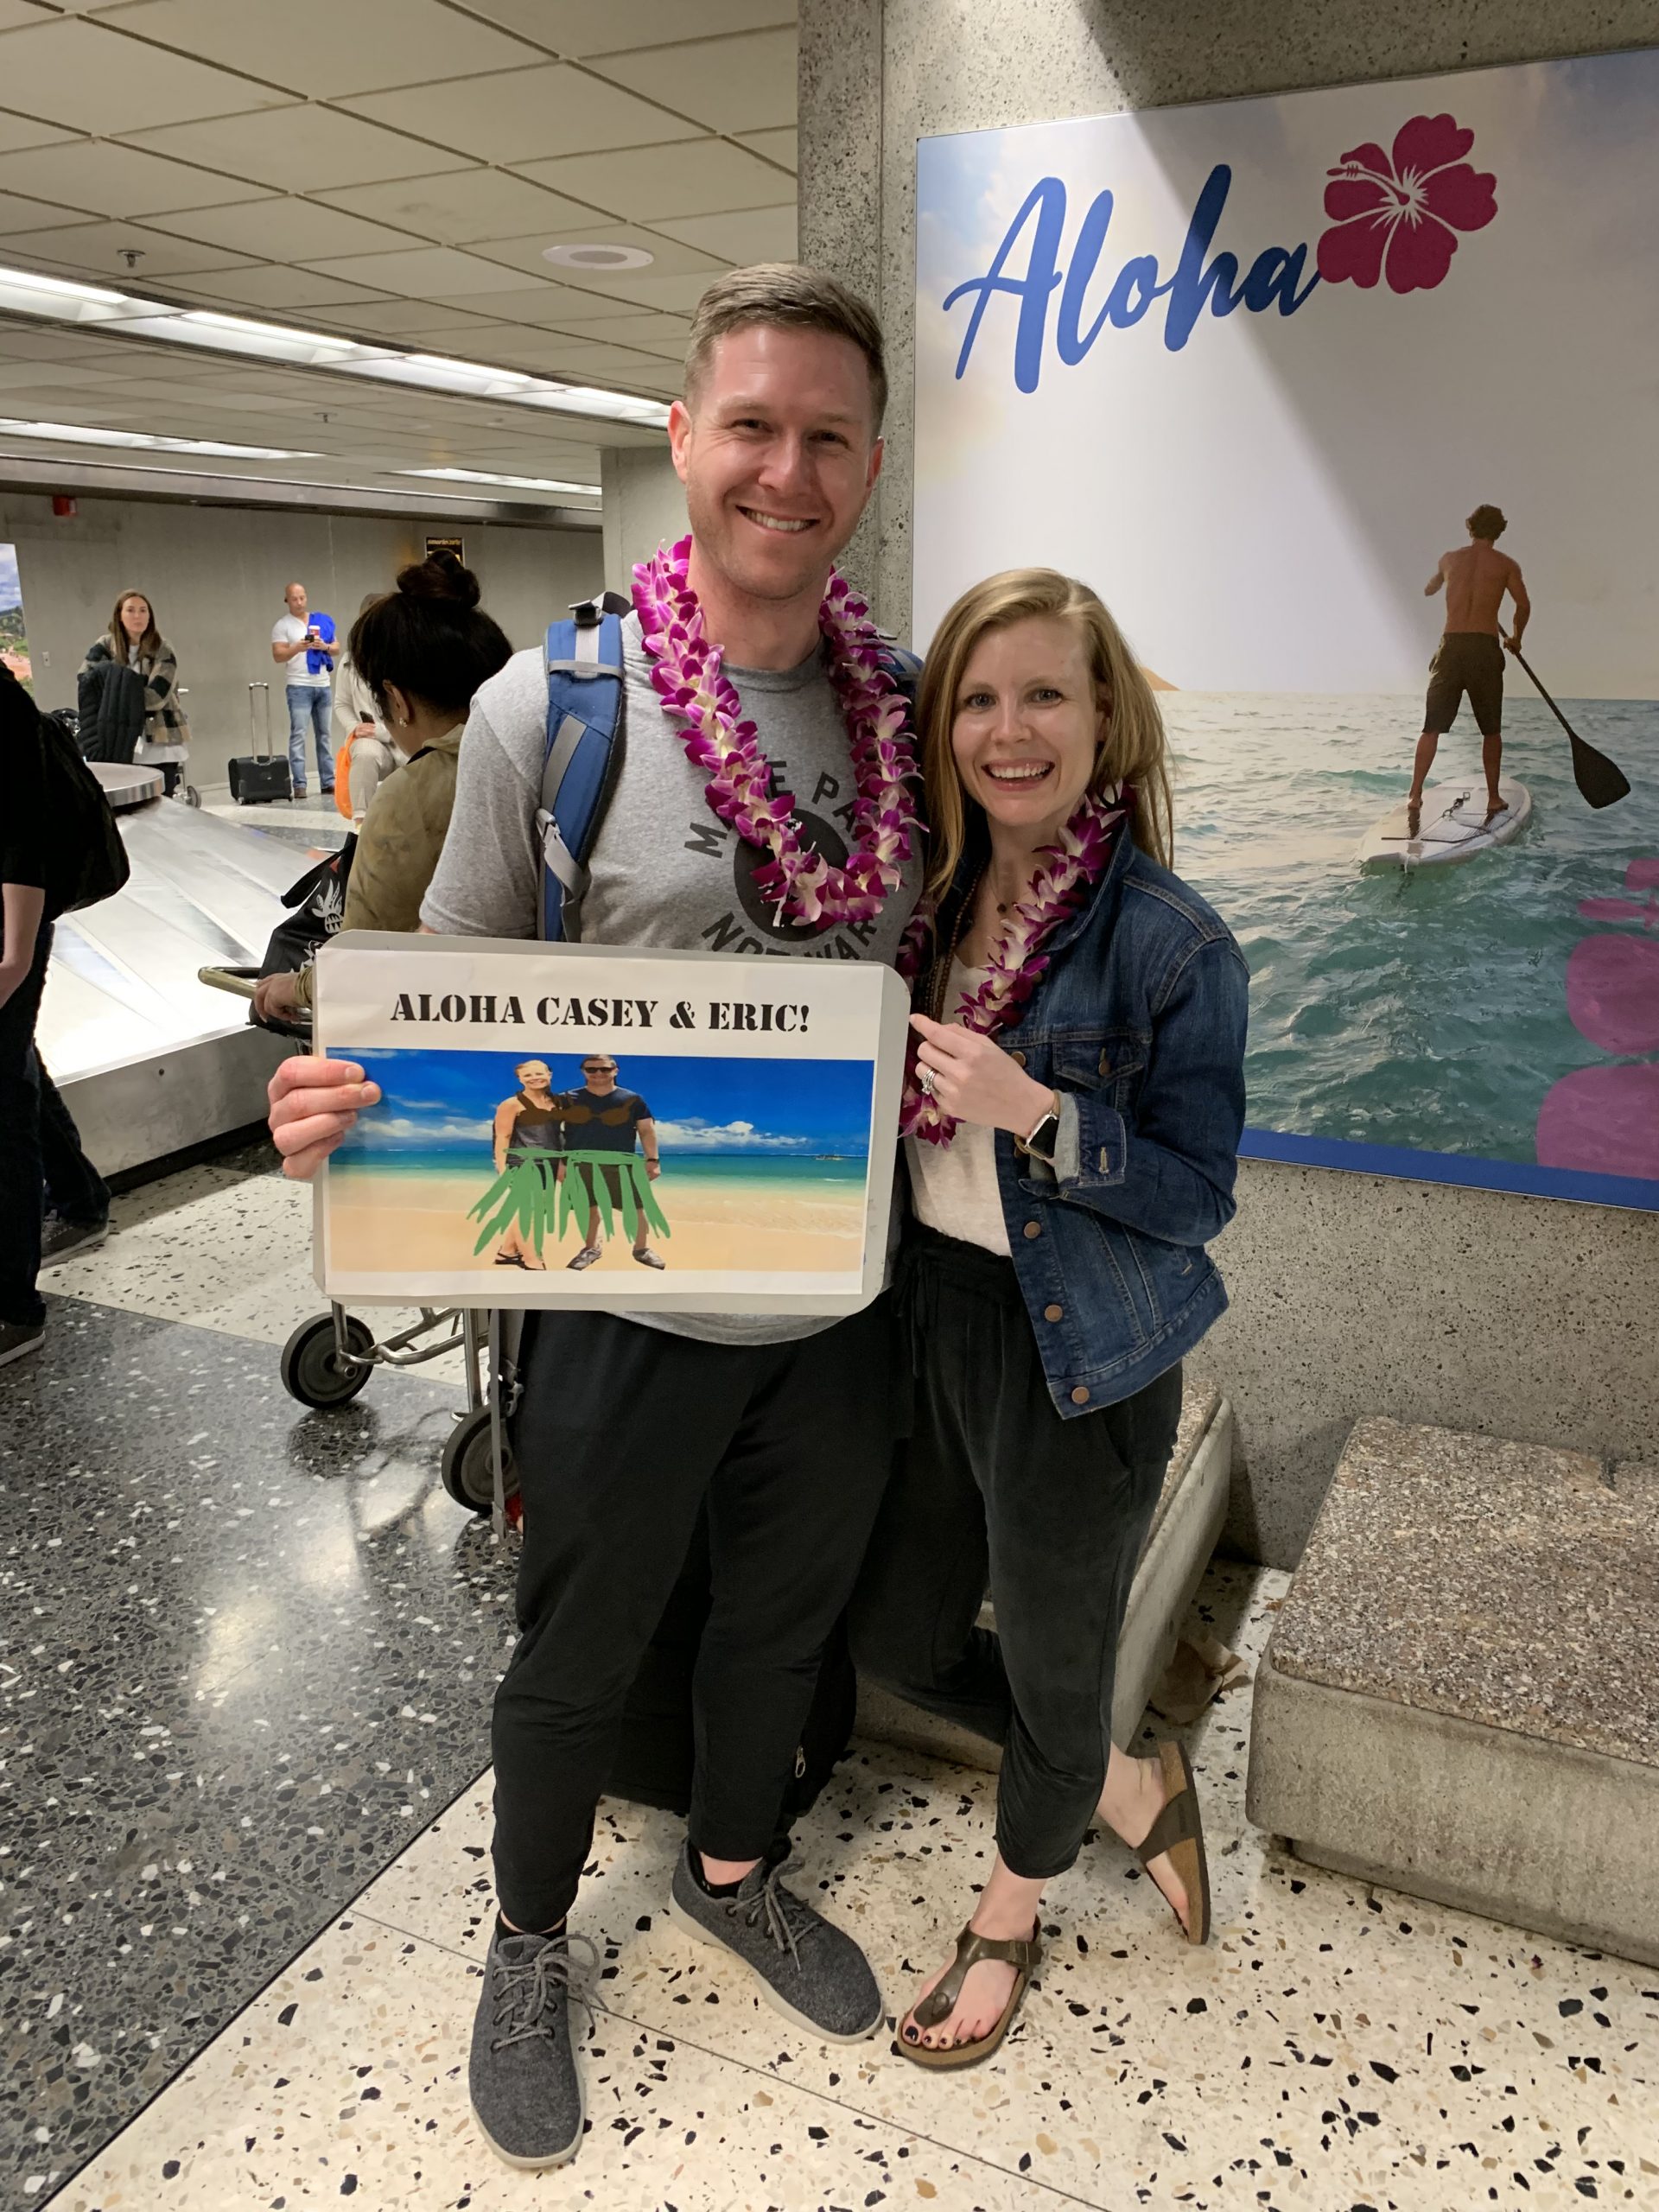 The Best Hawaii Itinerary - Sharing the best Hawaii itinerary, including what to see and where to eat, that includes three islands over two weeks! | Hawaii Itinerary - Hawaii Vacation Itinerary - Hawaii Planning Guide - 3 Hawaiian Island Itinerary - 10 Day Hawaii Itinerary 